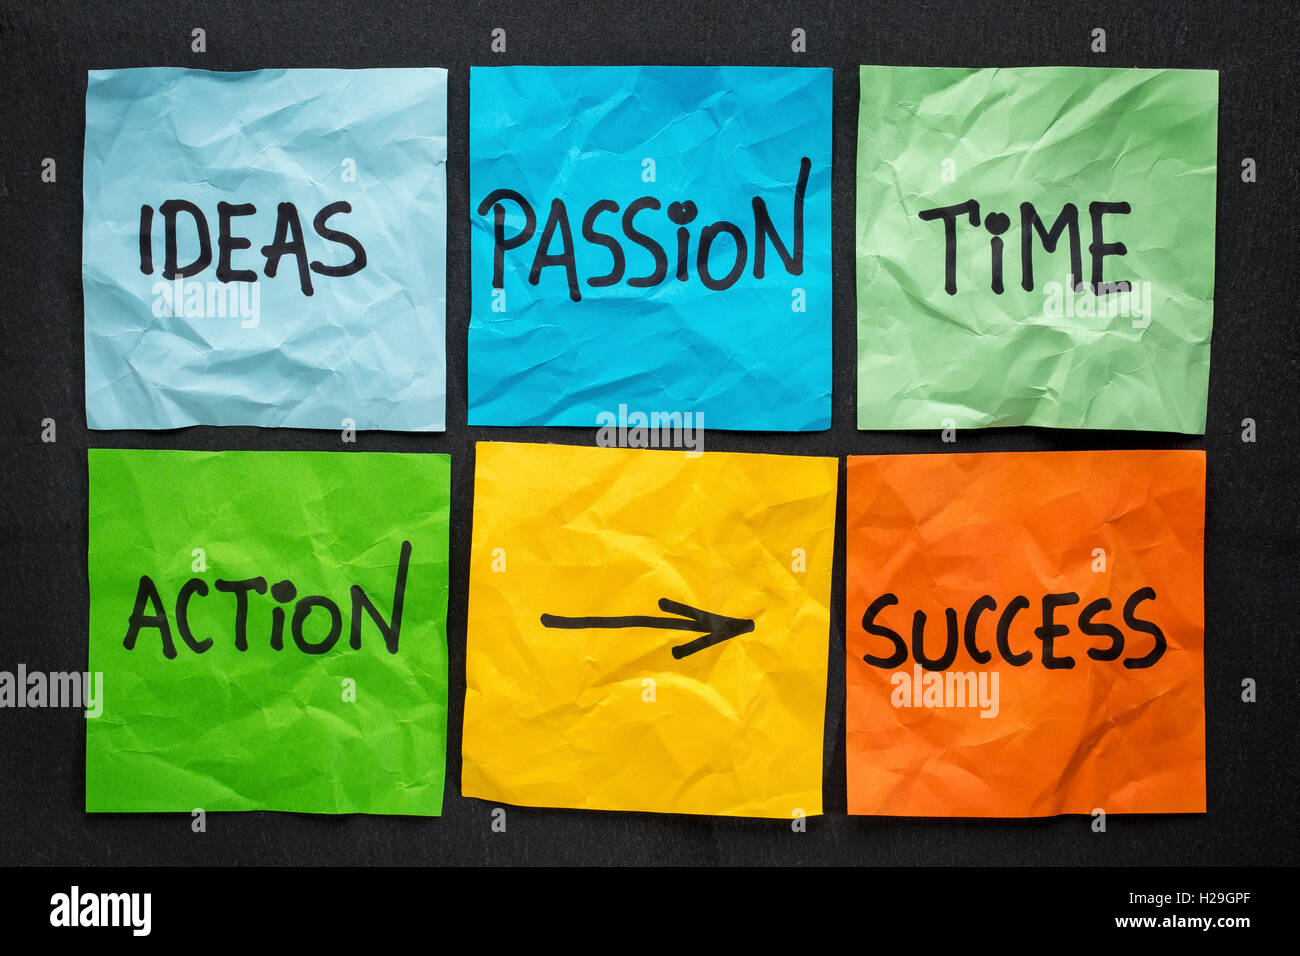 time, ideas, action, passion - success ingredients concept presented with colorful notes against black paper Stock Photo